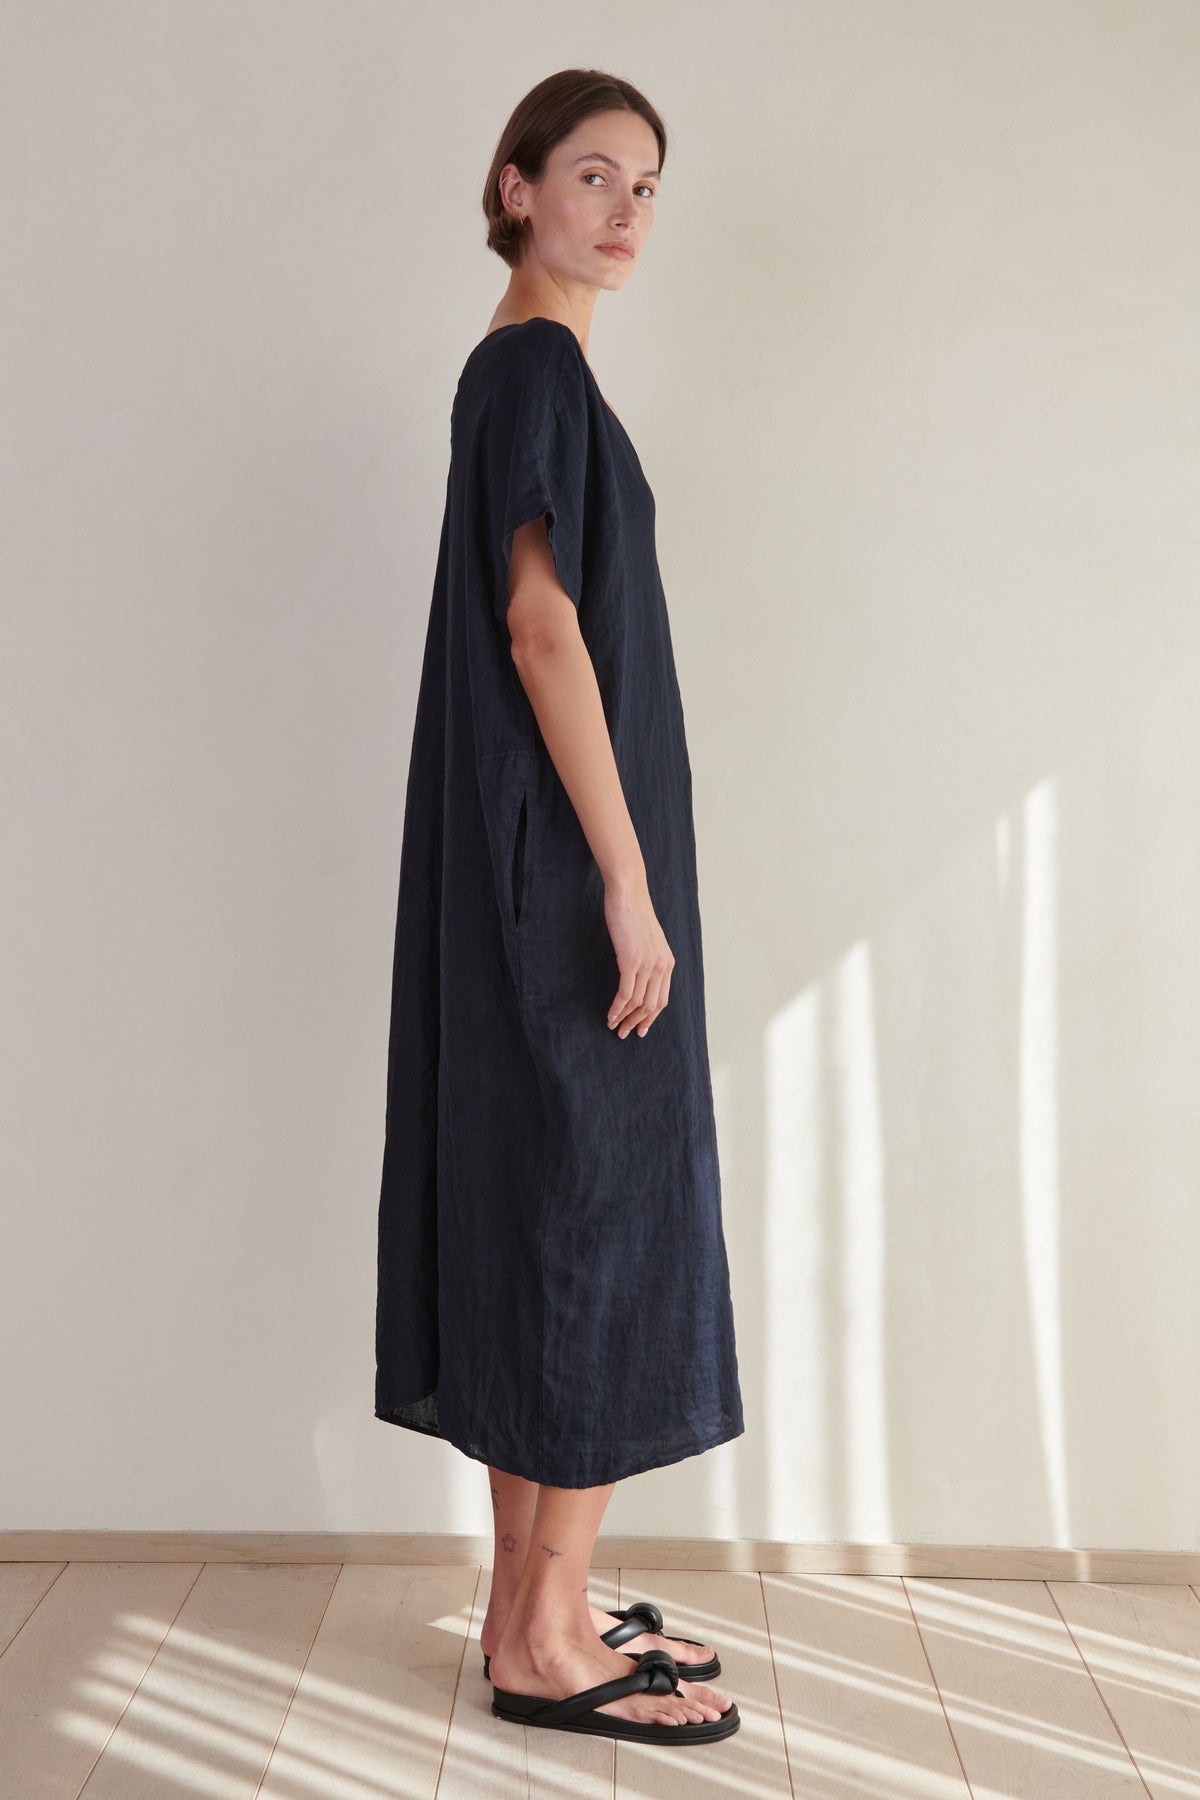 A woman in a loose navy-blue Montana linen dress by Velvet by Jenny Graham with a V neckline and black sandals standing in a room with a beige wall and tiled floor, sunlight casting shadows.-26293194653889